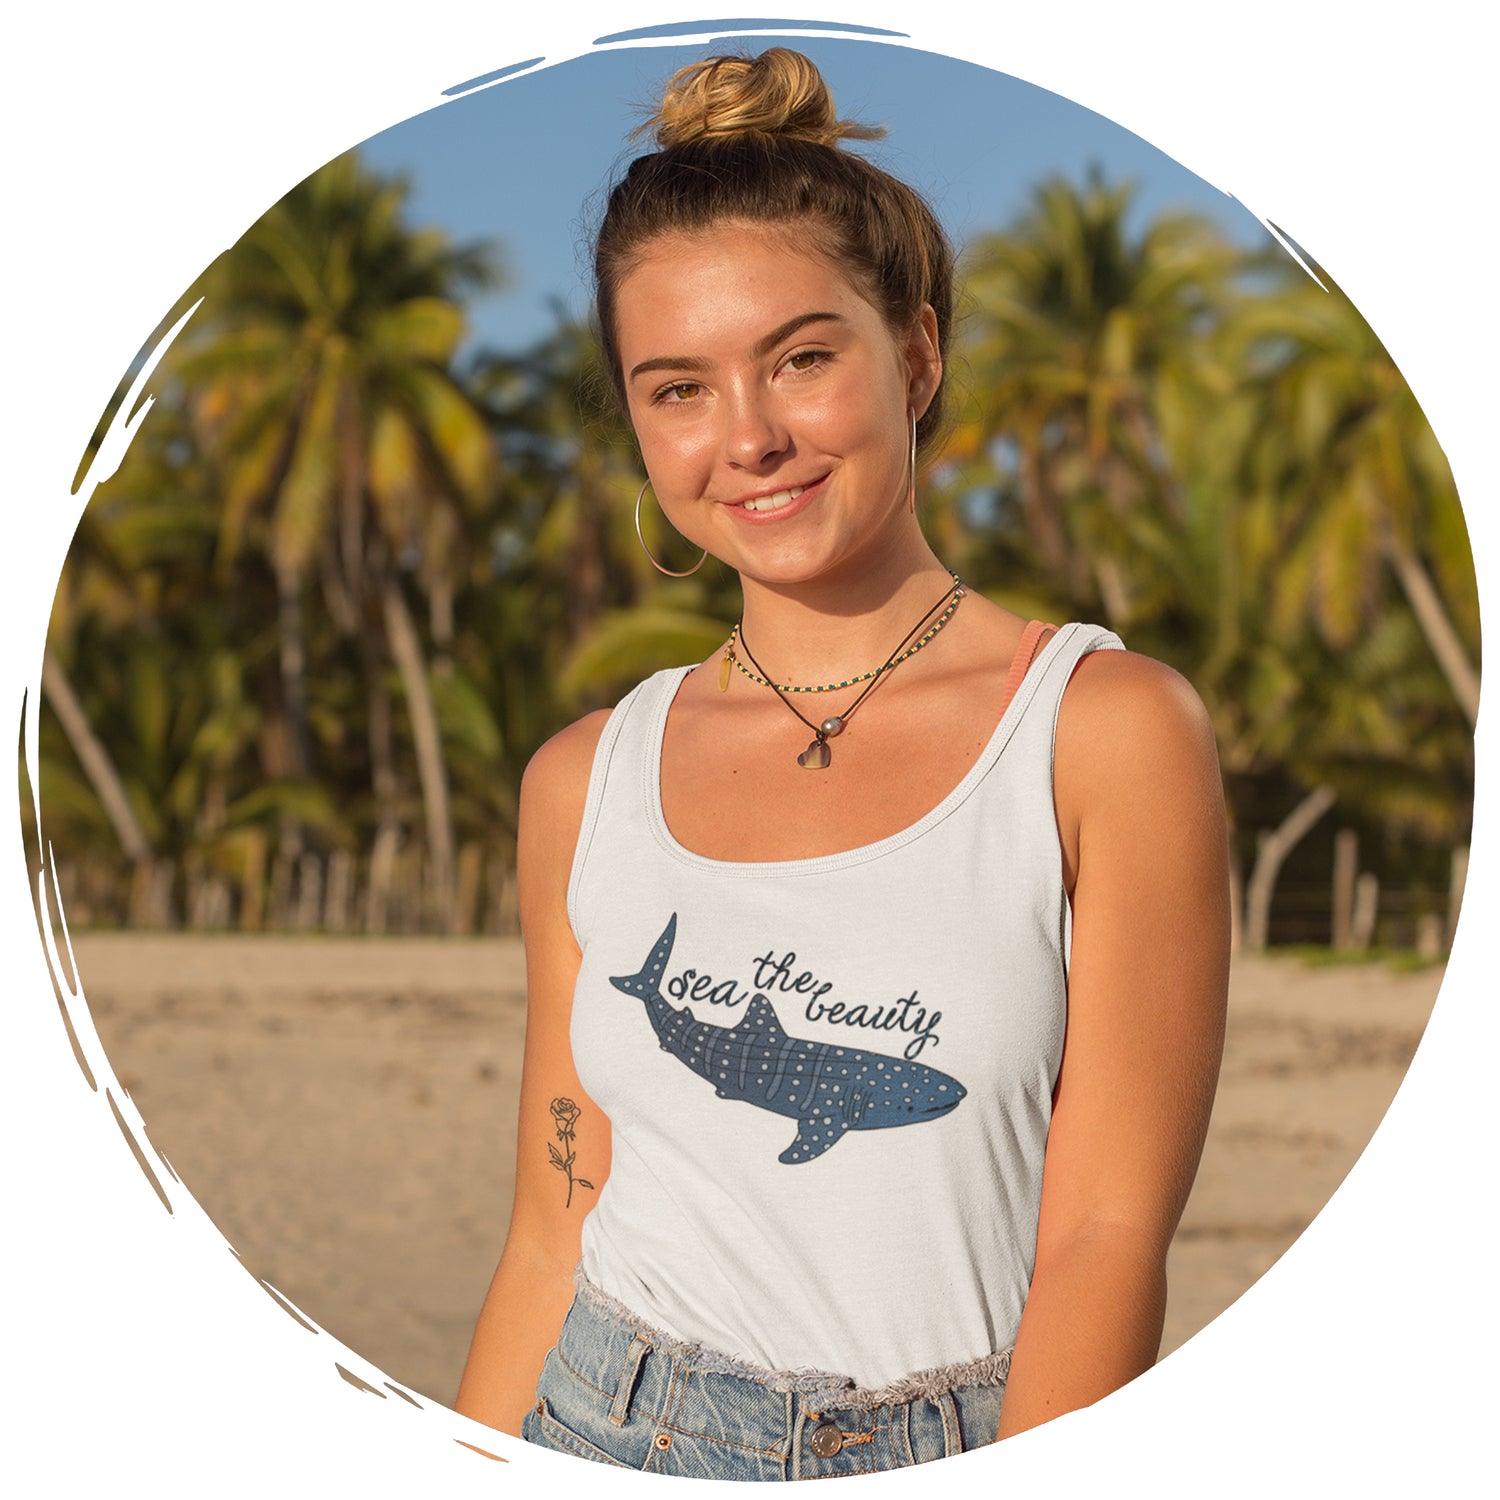 girl on beach with palm trees in background wearing getpinkfit's Sea The Beauty Whale Shark Tank Top - getpinkfit Brand Ambassador Program